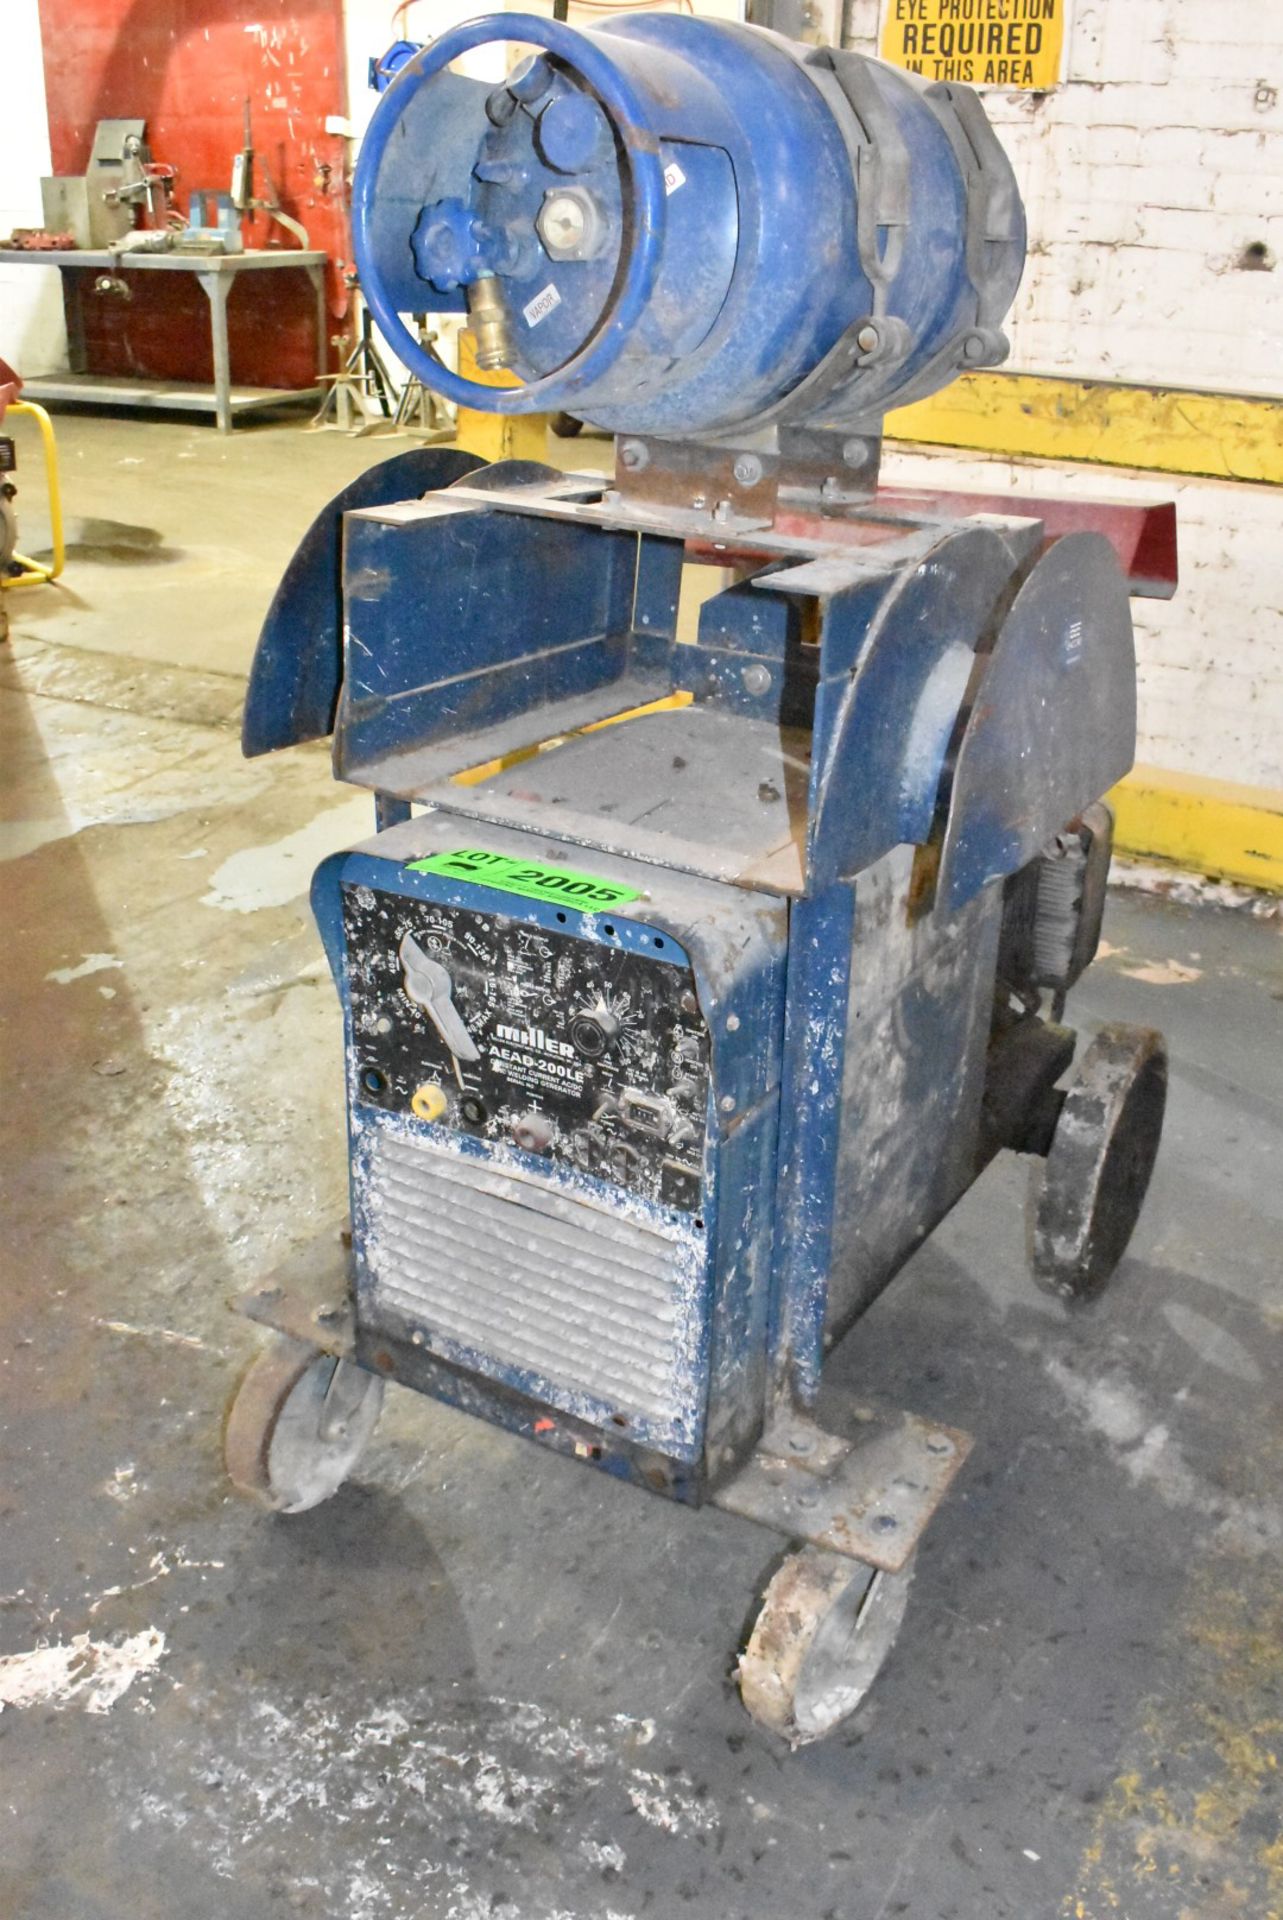 MILLER AEAD-200LE LPG POWERED CONSTANT CURRENT AC/DC WELDER GENERATOR WITH CART, 1961 HOURS RECORDED - Image 5 of 8